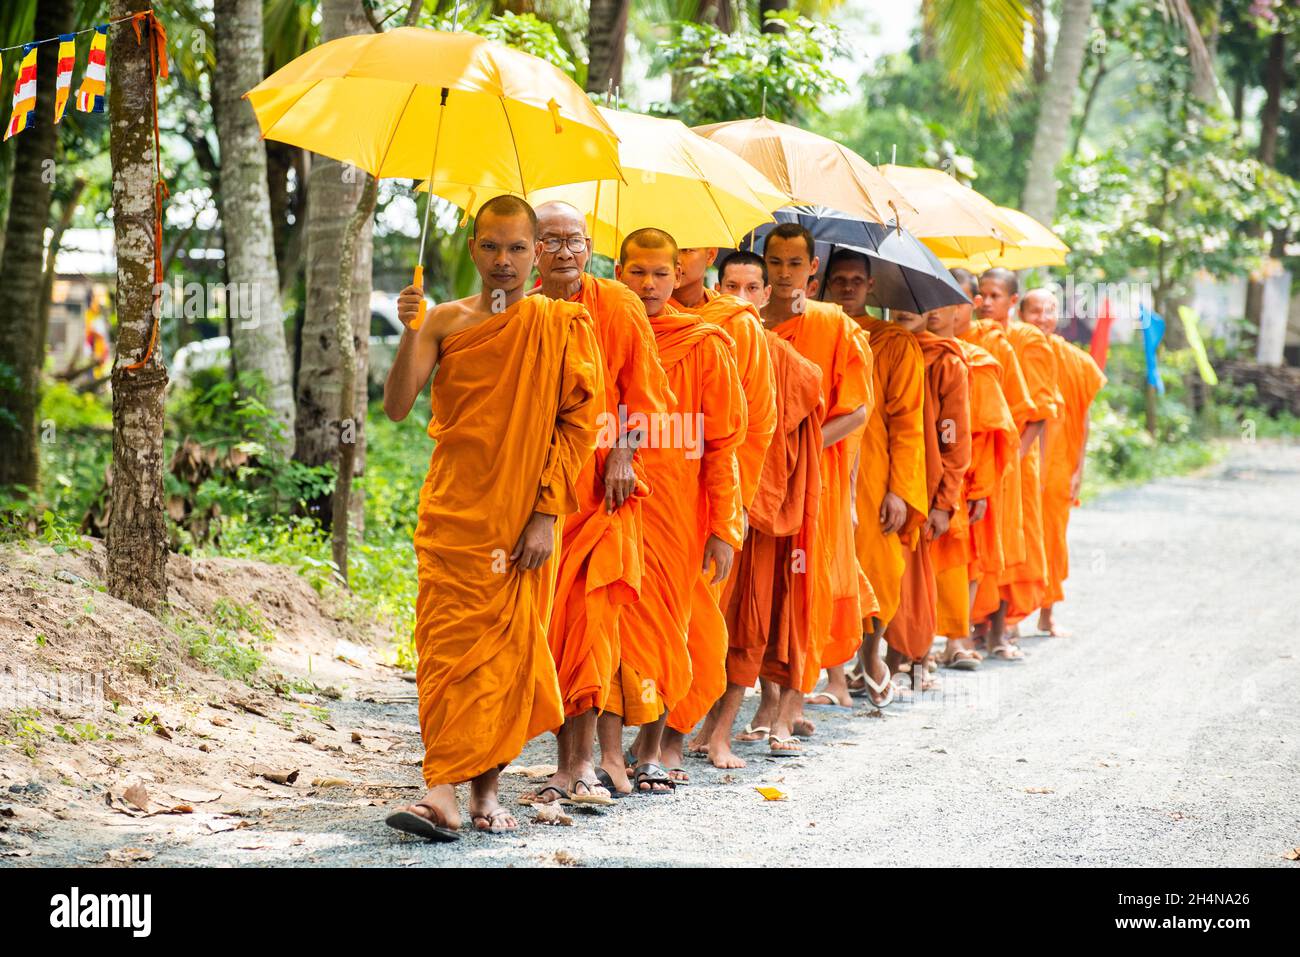 An Giang Sep 21, 2019. Theravada Buddhist monks perform religious rituals around the temple Stock Photo